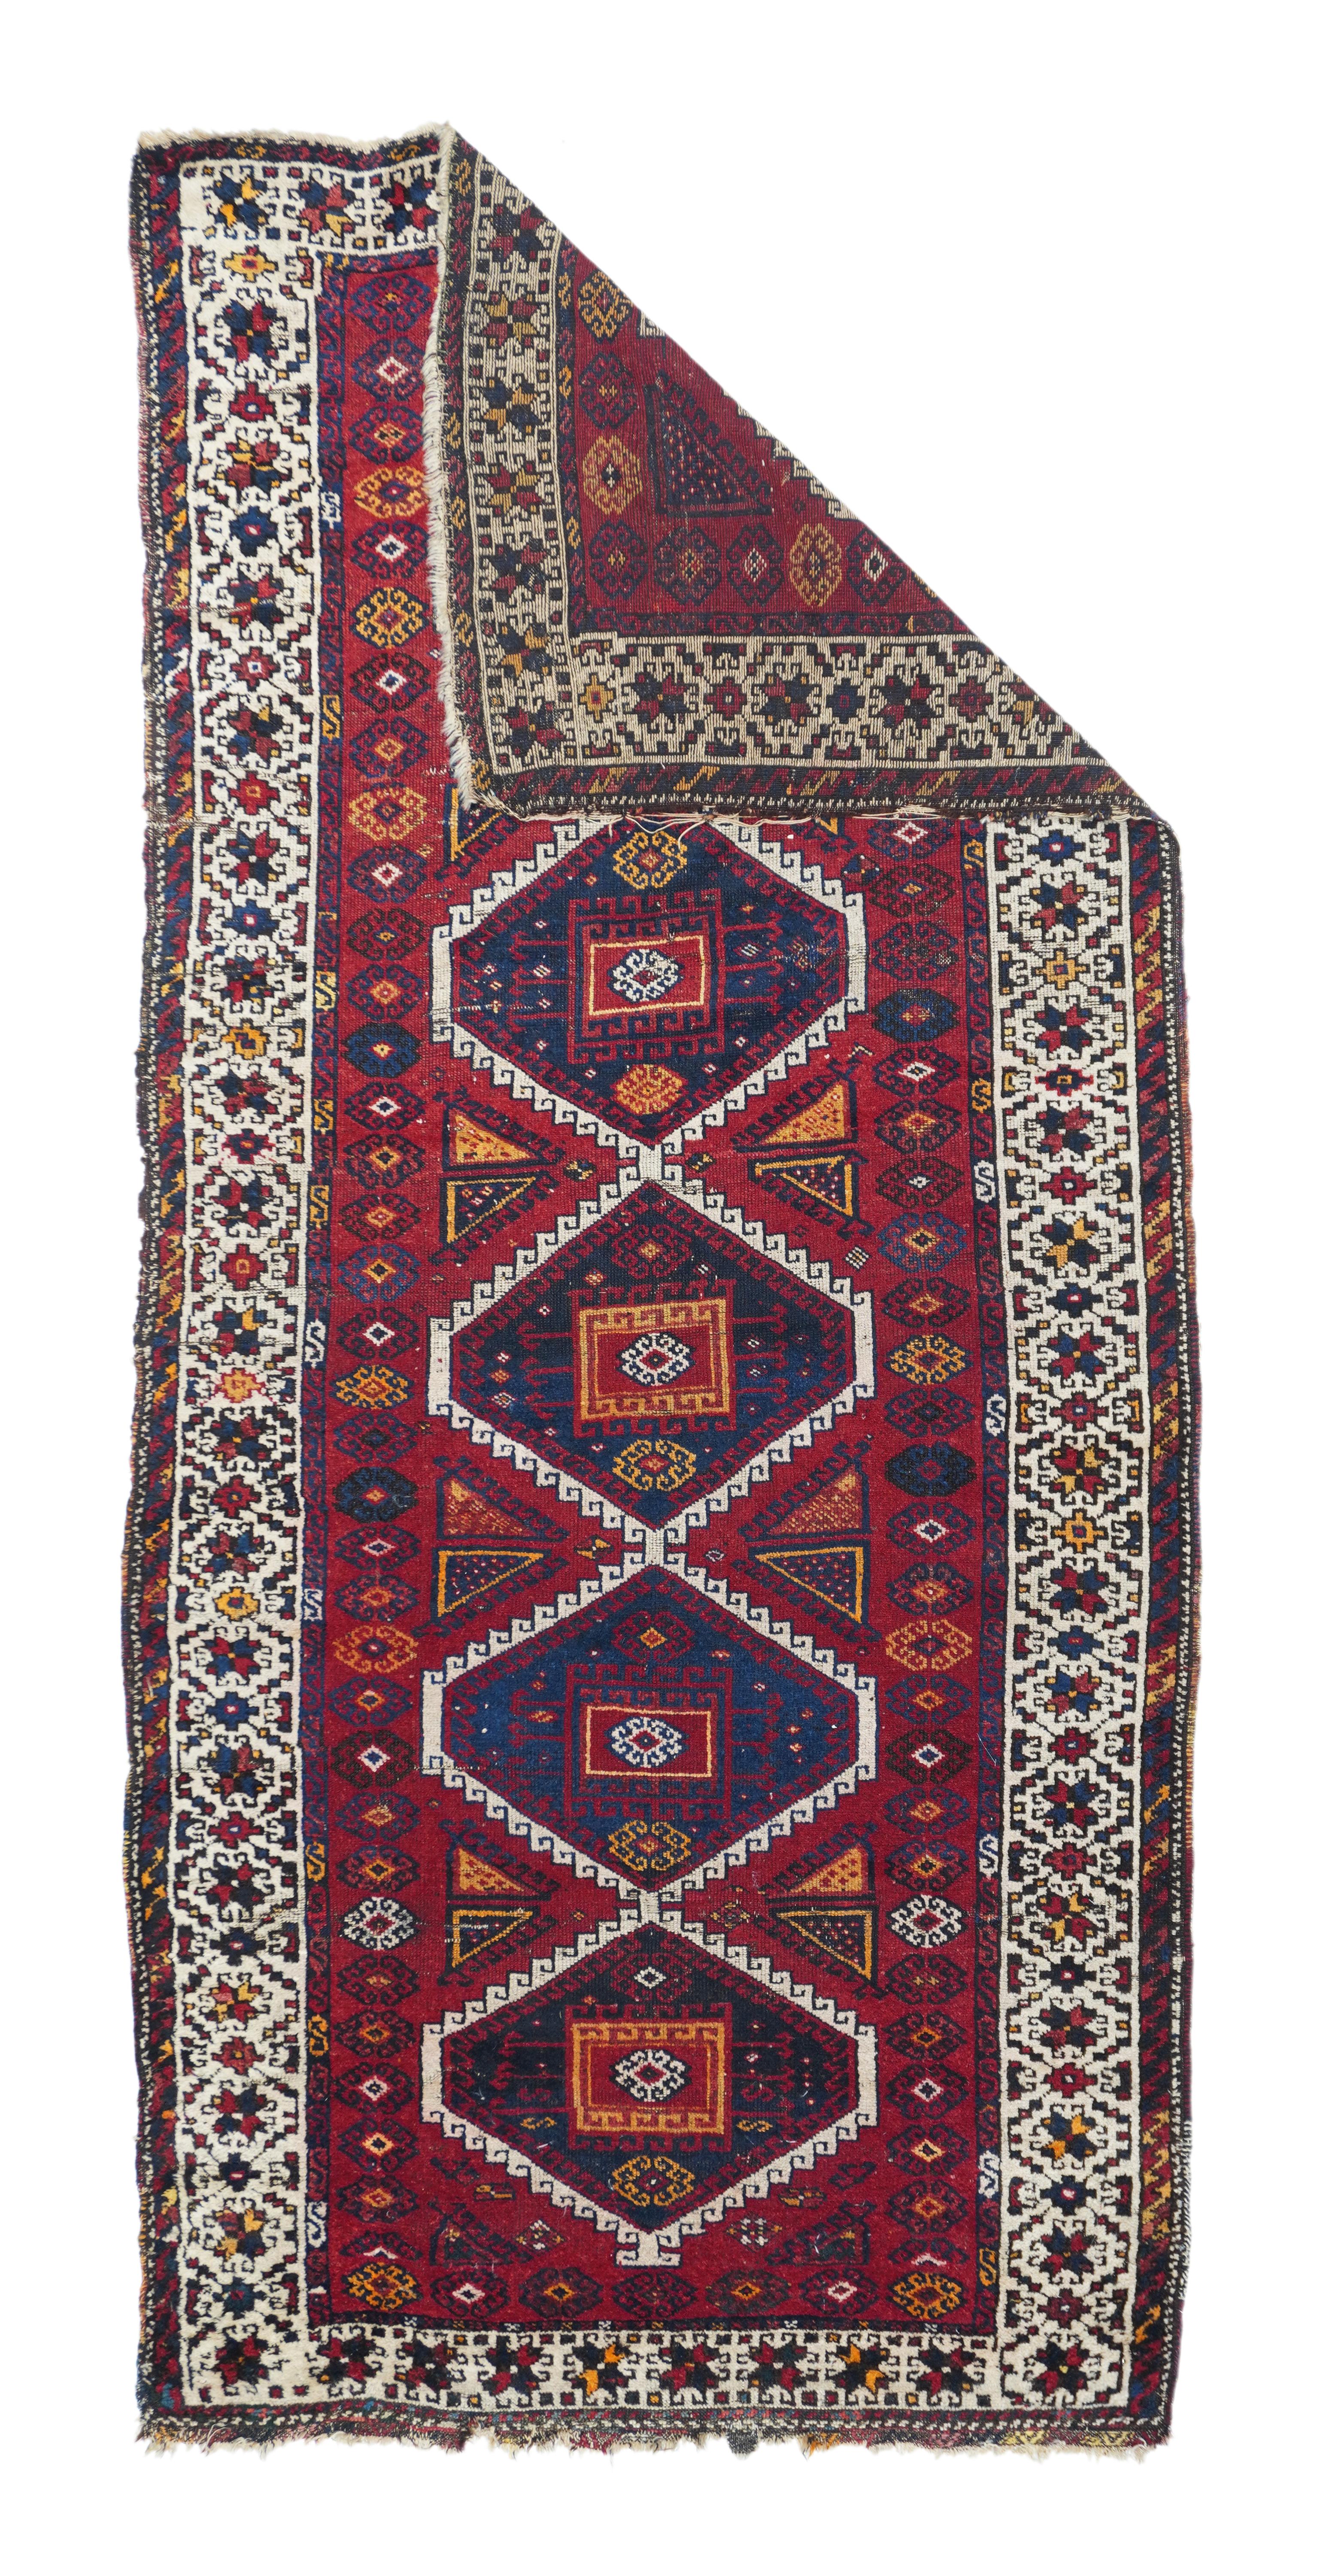 Antique Ghashgaie Rug 4'3'' x 9'5''. Not Persian, but from the Kurdish Yuruk tribes of eastern Anatolia. The characteristic orange-red field displays hooked ecru pole medallion of five dark blue and red joined hexagons, with split triangular fillers